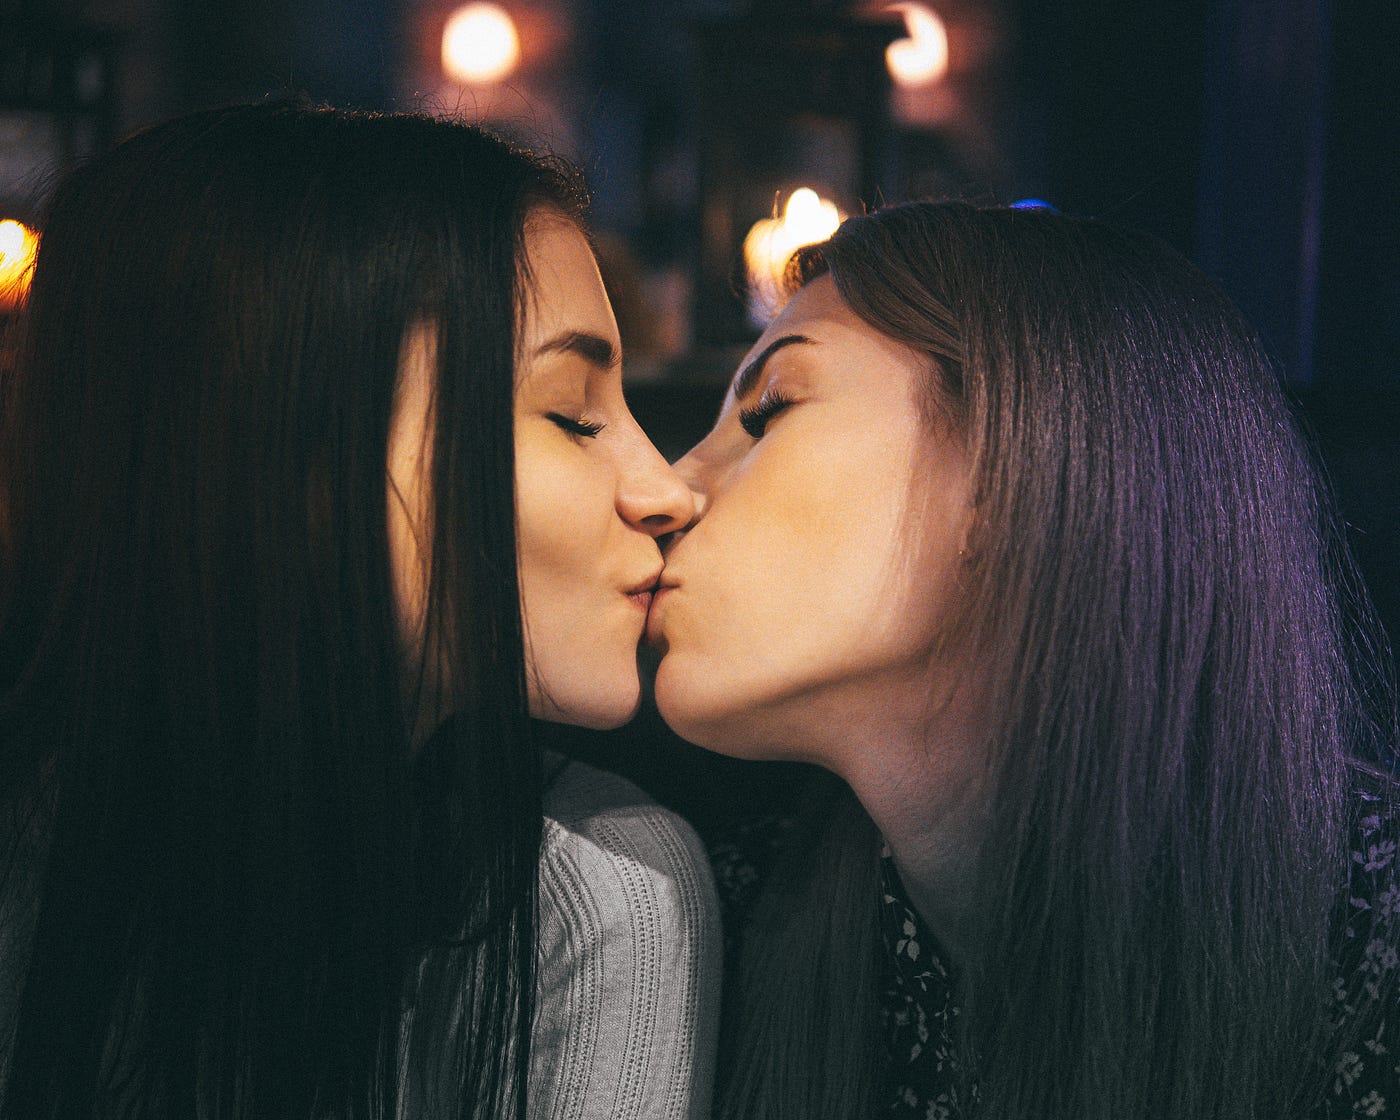 Two women are kissing with outdoor lights behind them. #lesbians #twogirlsk...